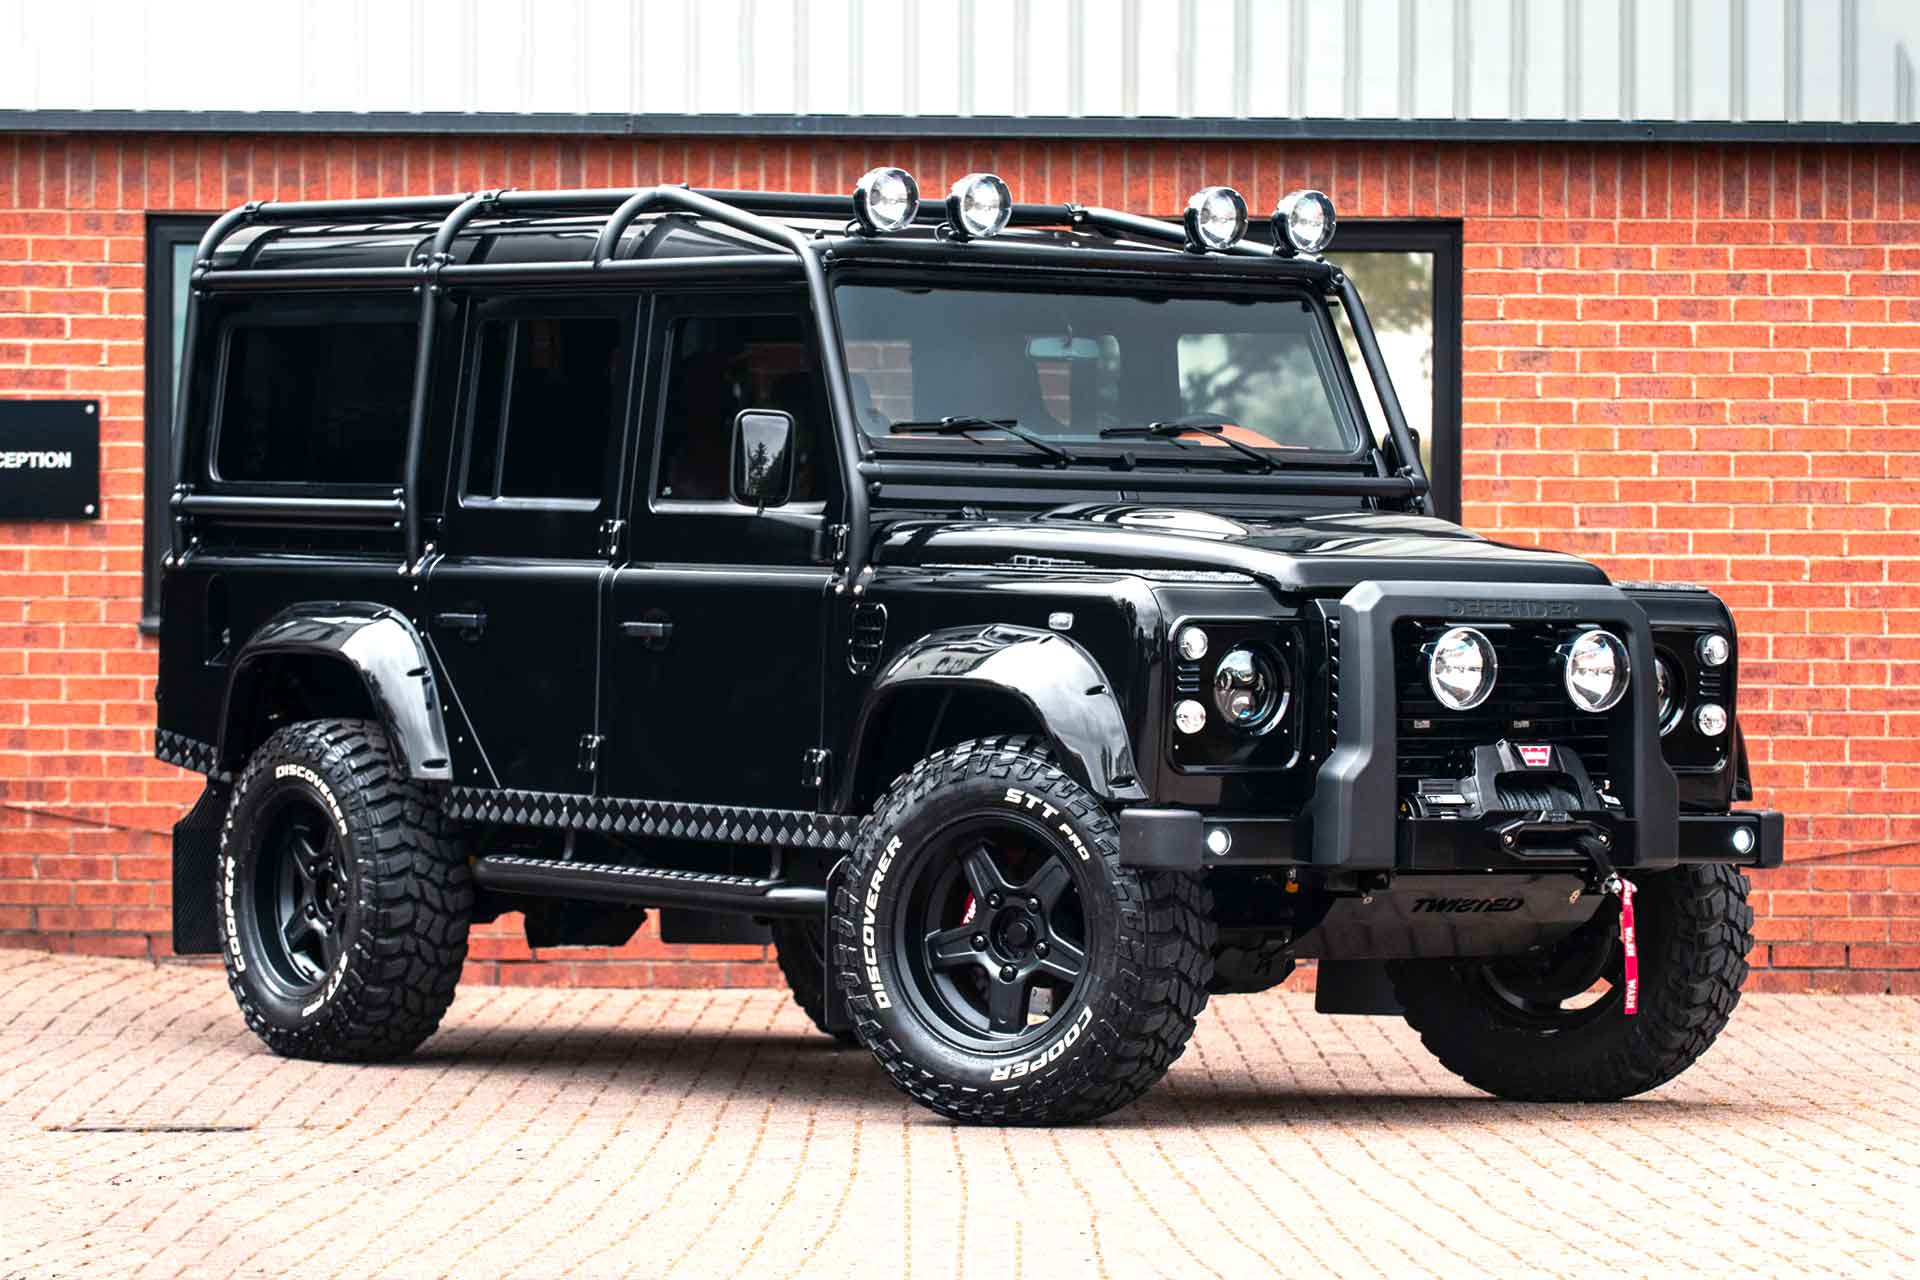 Twisted NAV8 Land Rover Defender SUV Uncrate